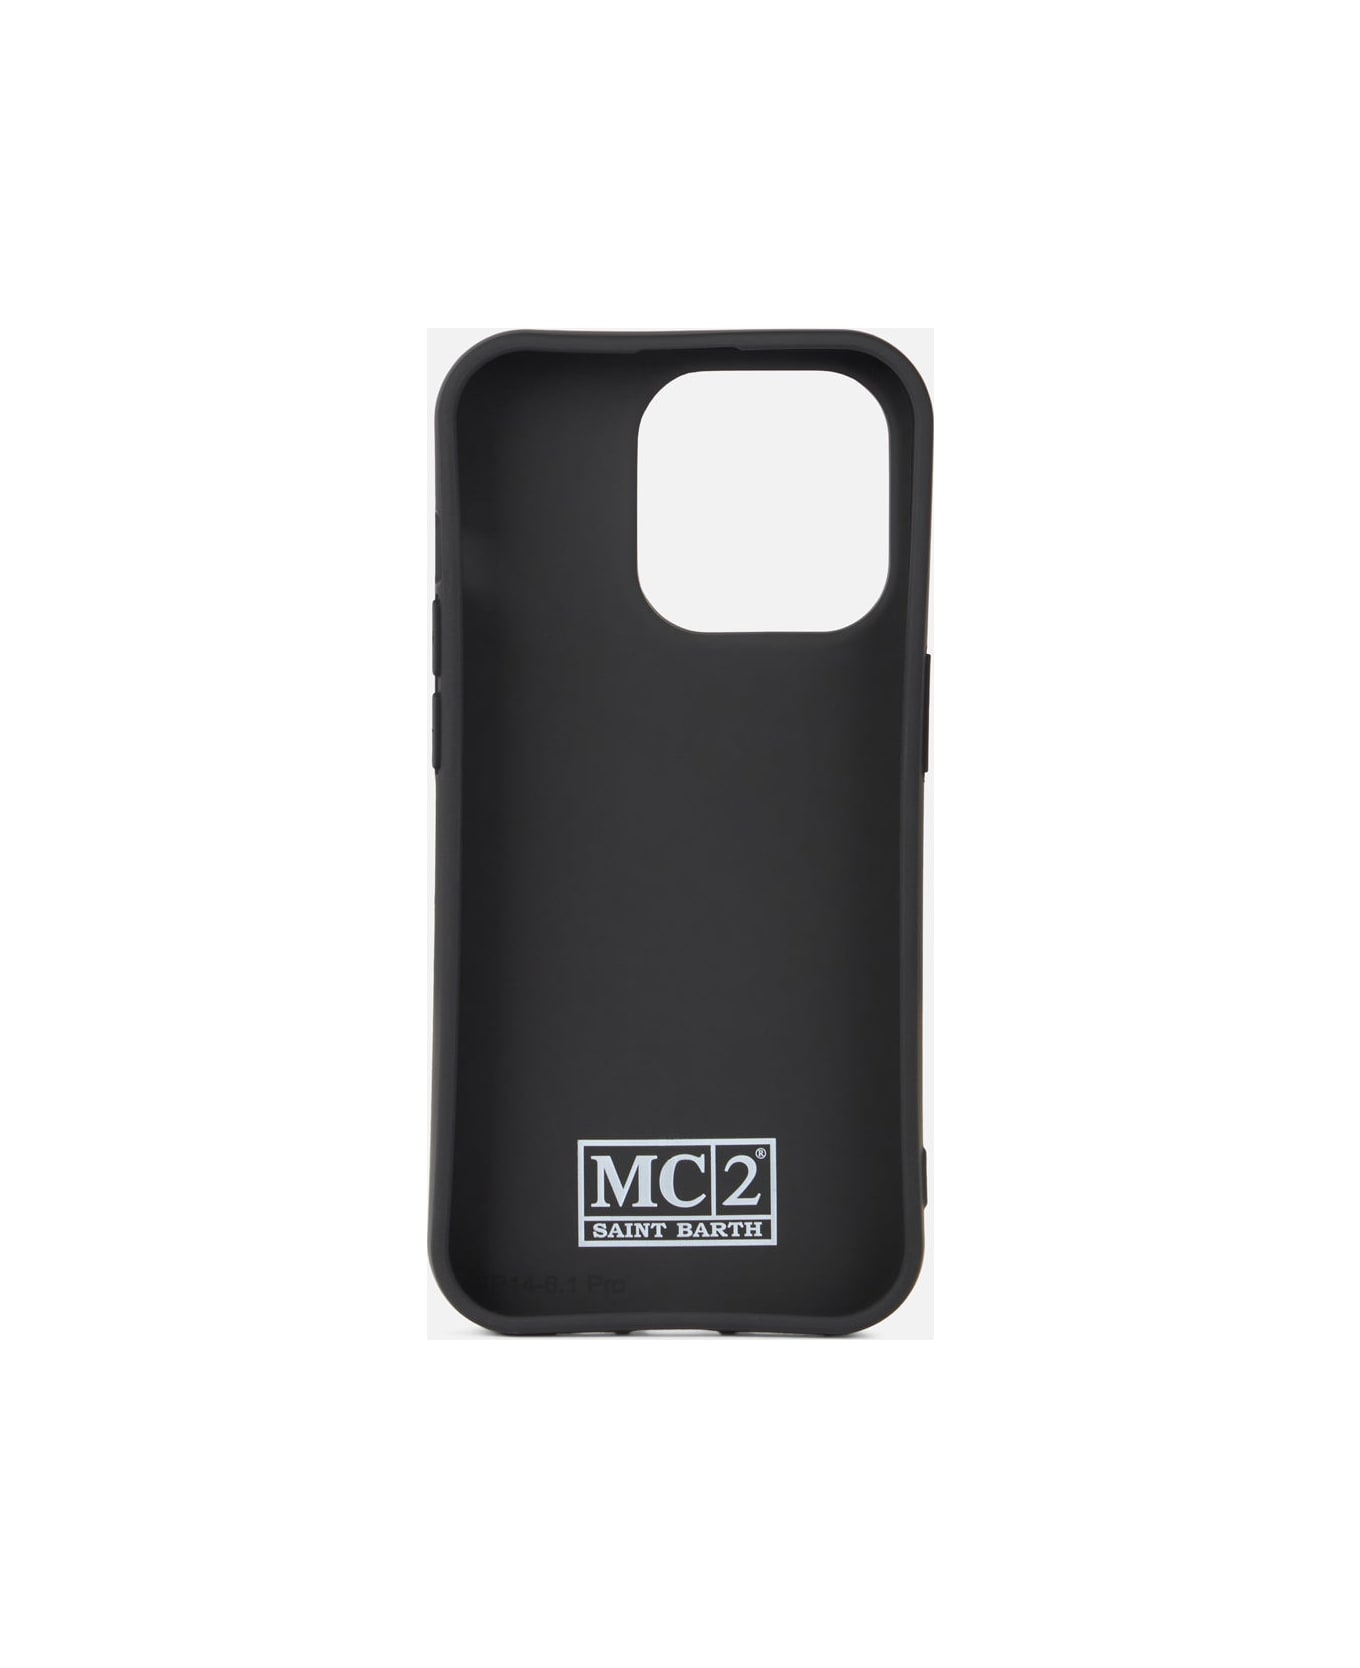 MC2 Saint Barth Cover For Iphone 14 Pro With Bandanna Print - FLUO